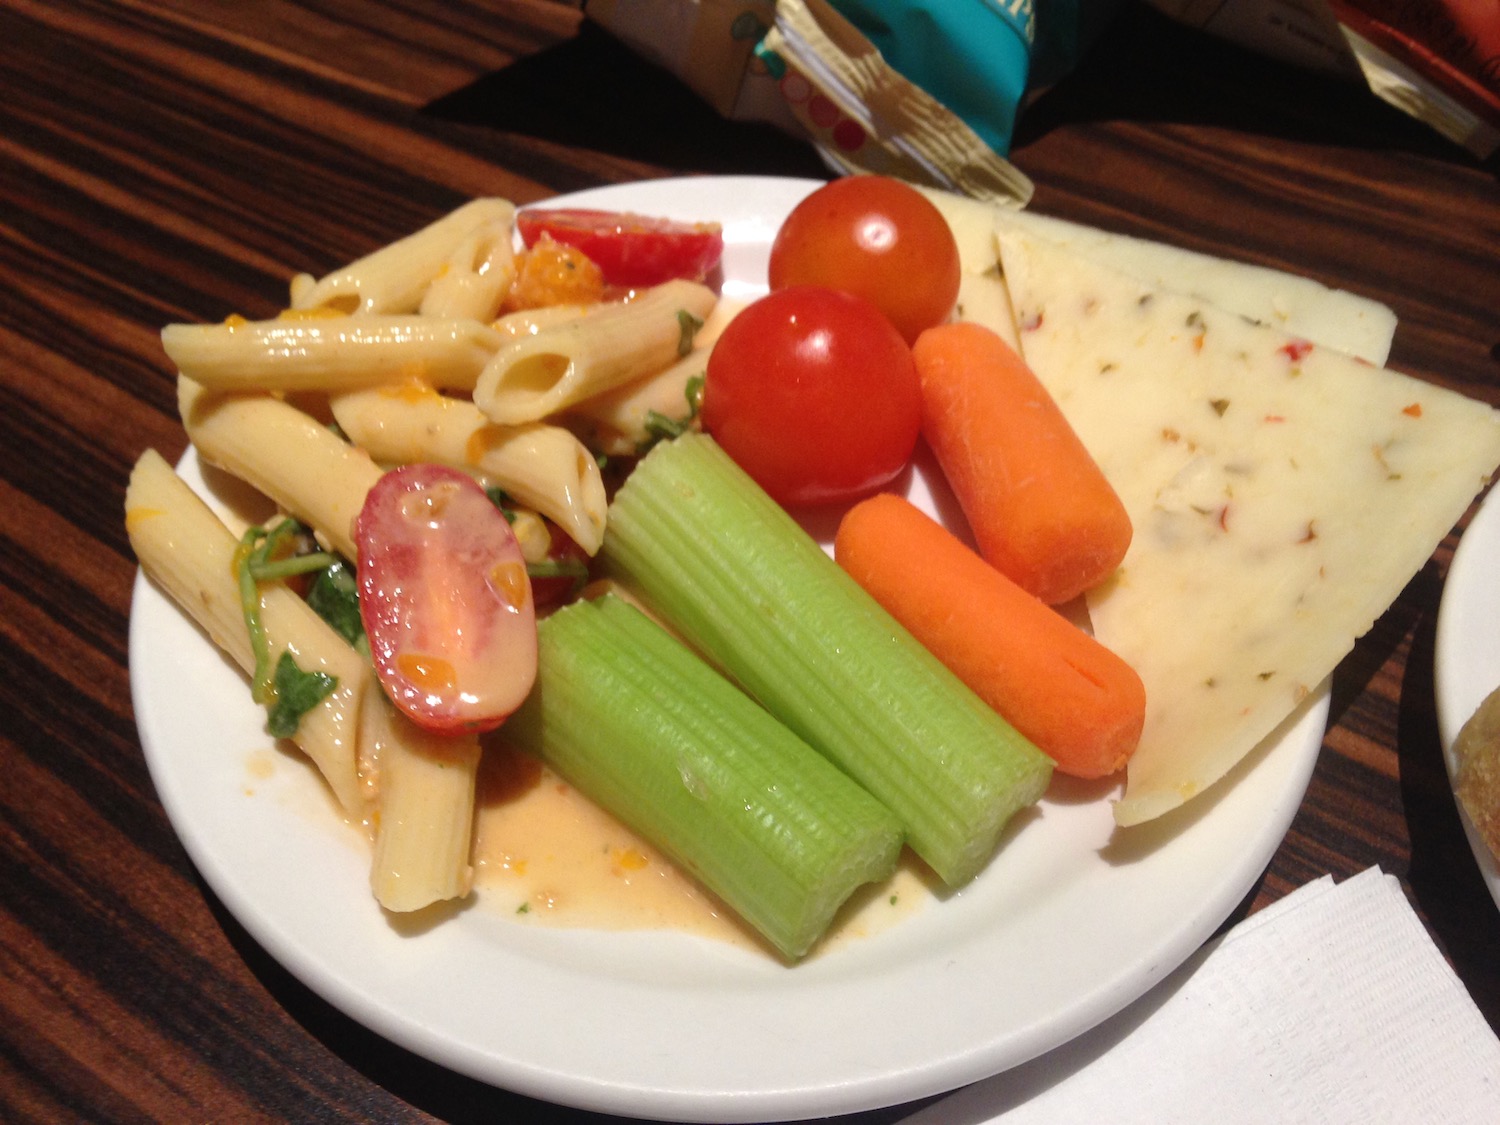 a plate of food with pasta carrots and cheese